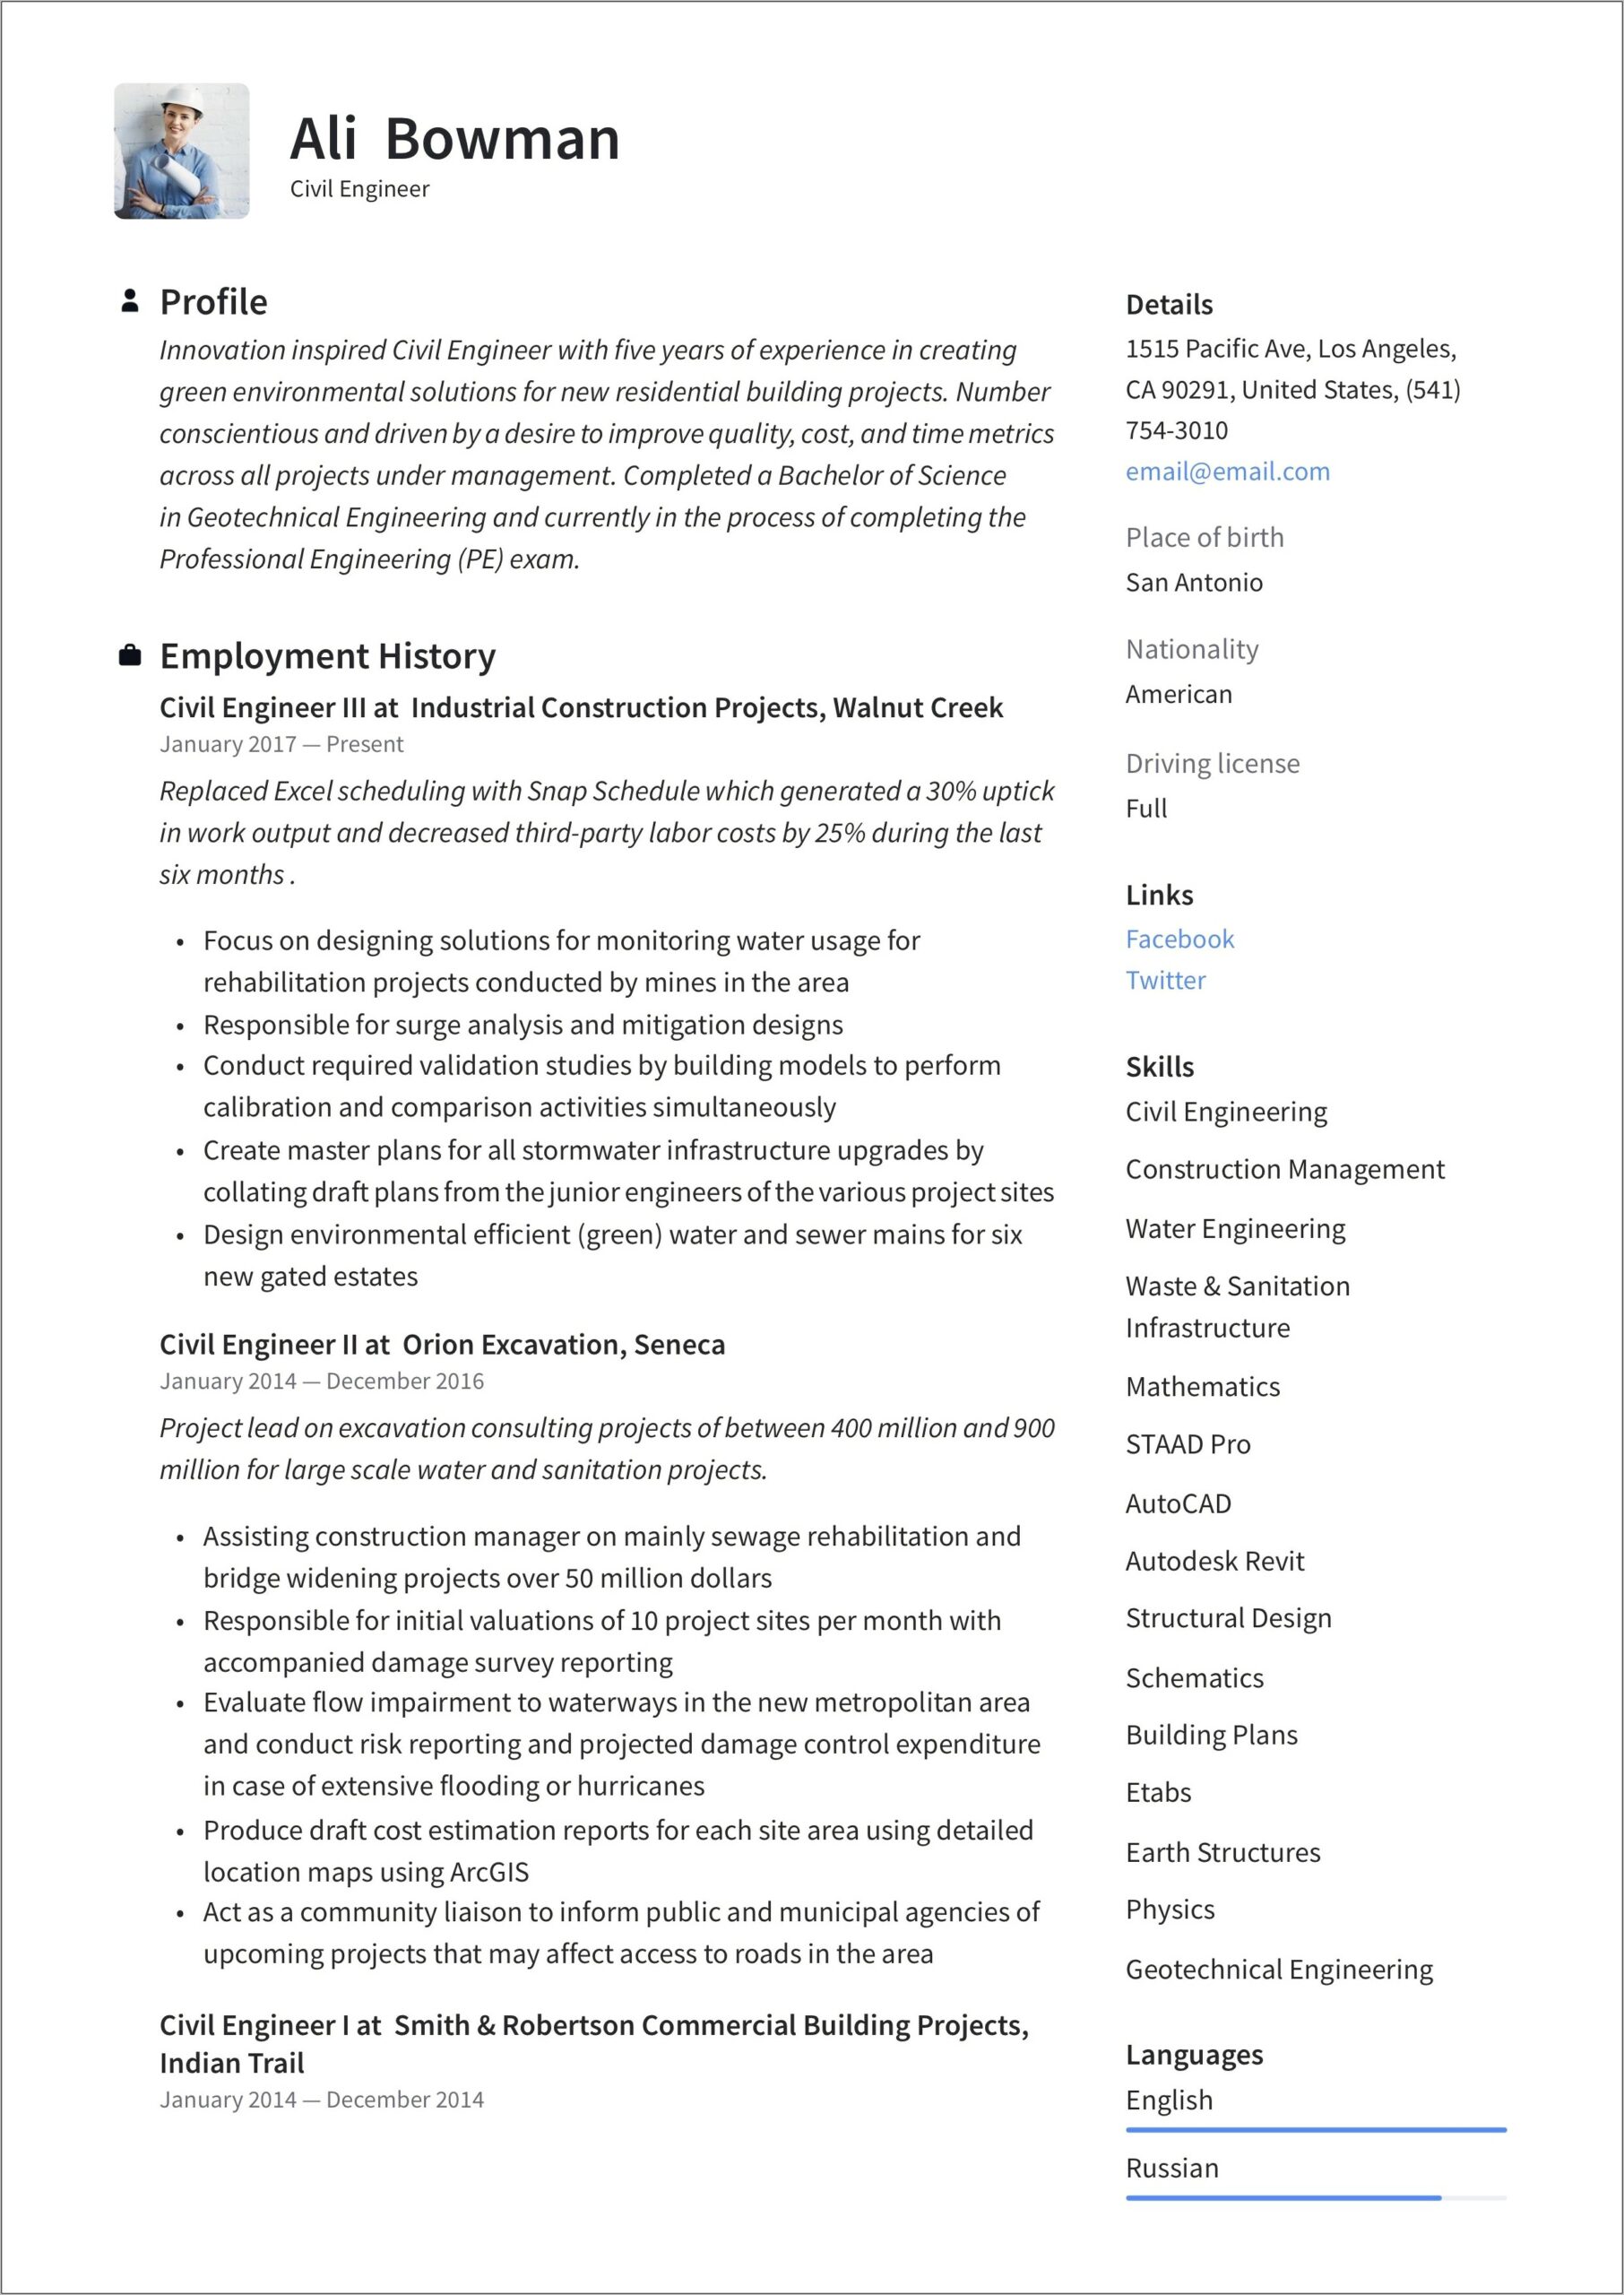 Entry Level Civil Engineering Resume Examples 2019